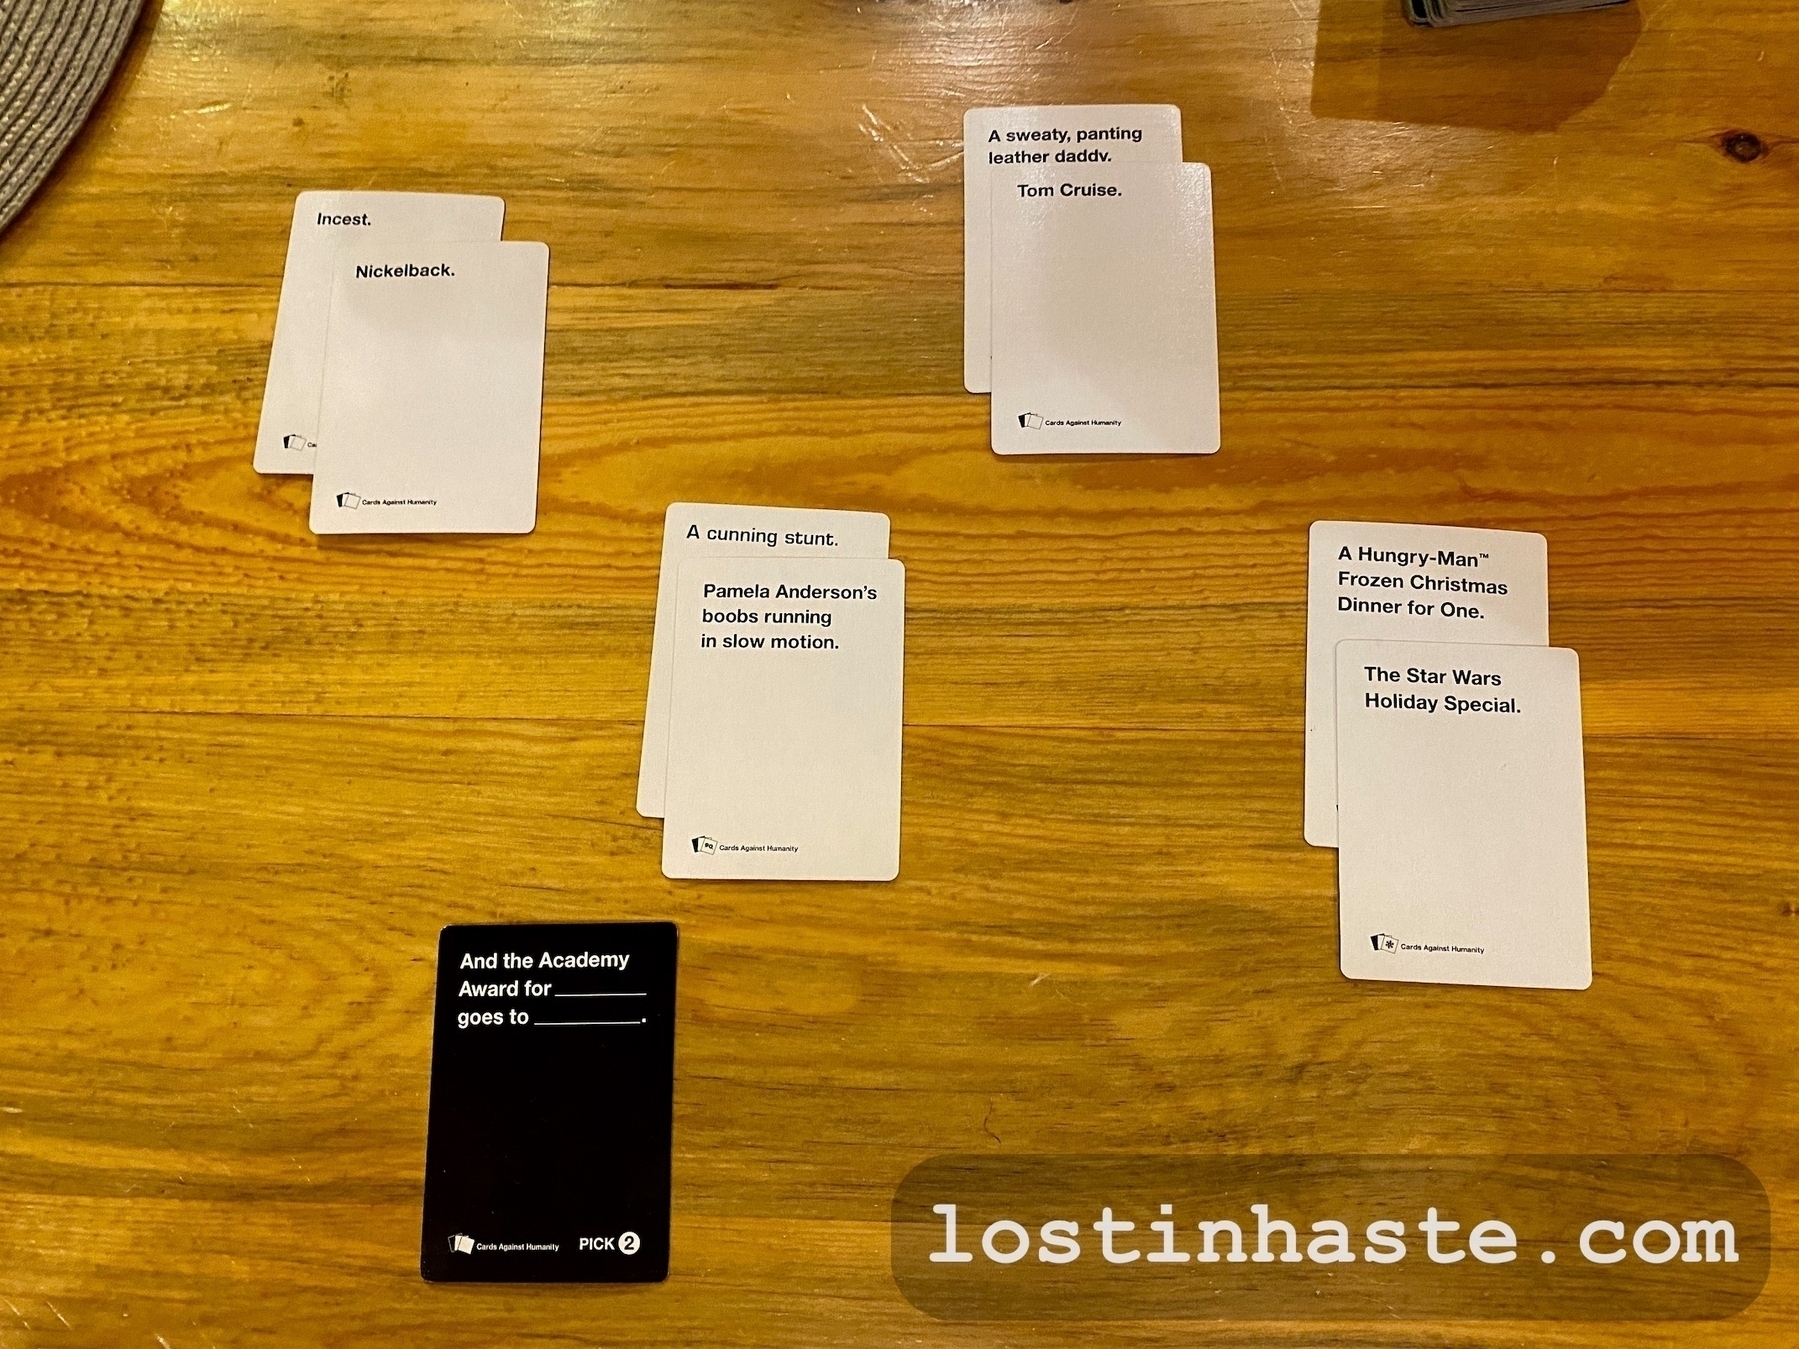 Playing cards are displayed on a wooden table, part of a card game setup with text on them to be combined humorously. Text on cards: 'Incest', 'Nickelback', 'A sweaty, panting leather daddy', 'Tom Cruise', 'A cunning stunt', 'Pamela Andersons boobs running in slow motion', 'A Hungry-Man® Frozen Christmas Dinner for One', 'The Star Wars Holiday Special', 'And the Academy Award for _____ goes to _____ (Black card)', 'PICK 2 (on the black card)'. The image has a 'lostinhaste.com' watermark.